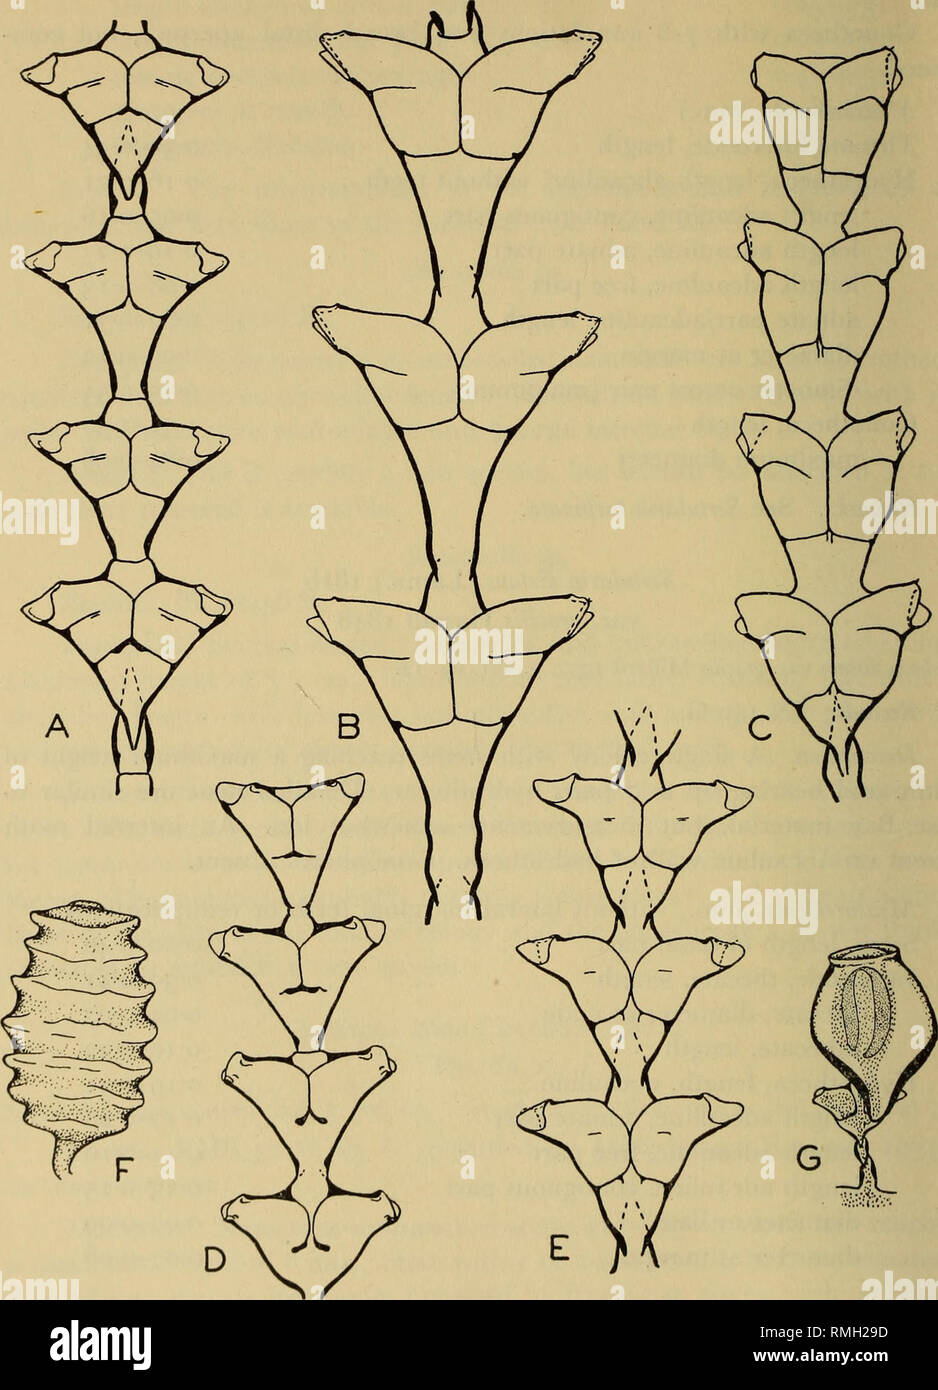 . Annals of the South African Museum = Annale van die Suid-Afrikaanse Museum. Natural history. 194 ANNALS OF THE SOUTH AFRICAN MUSEUM. I &lt; Fig. 8. Sertularia acuta (Stechow) (A, F); Sertularia turbinata (Lamx.) (B); Sertularia ligulaat Thornely (G); Sertularia linealis Warren (D, G); and Sertularia linealis var. longa n. var. (E). A and F, stem and gonotheca from RHB 52G. C from PZ 13E. D and G, stem and male gonophore from IN 49H. Opercular valves in dotted lines.. Please note that these images are extracted from scanned page images that may have been digitally enhanced for readability - c Stock Photo